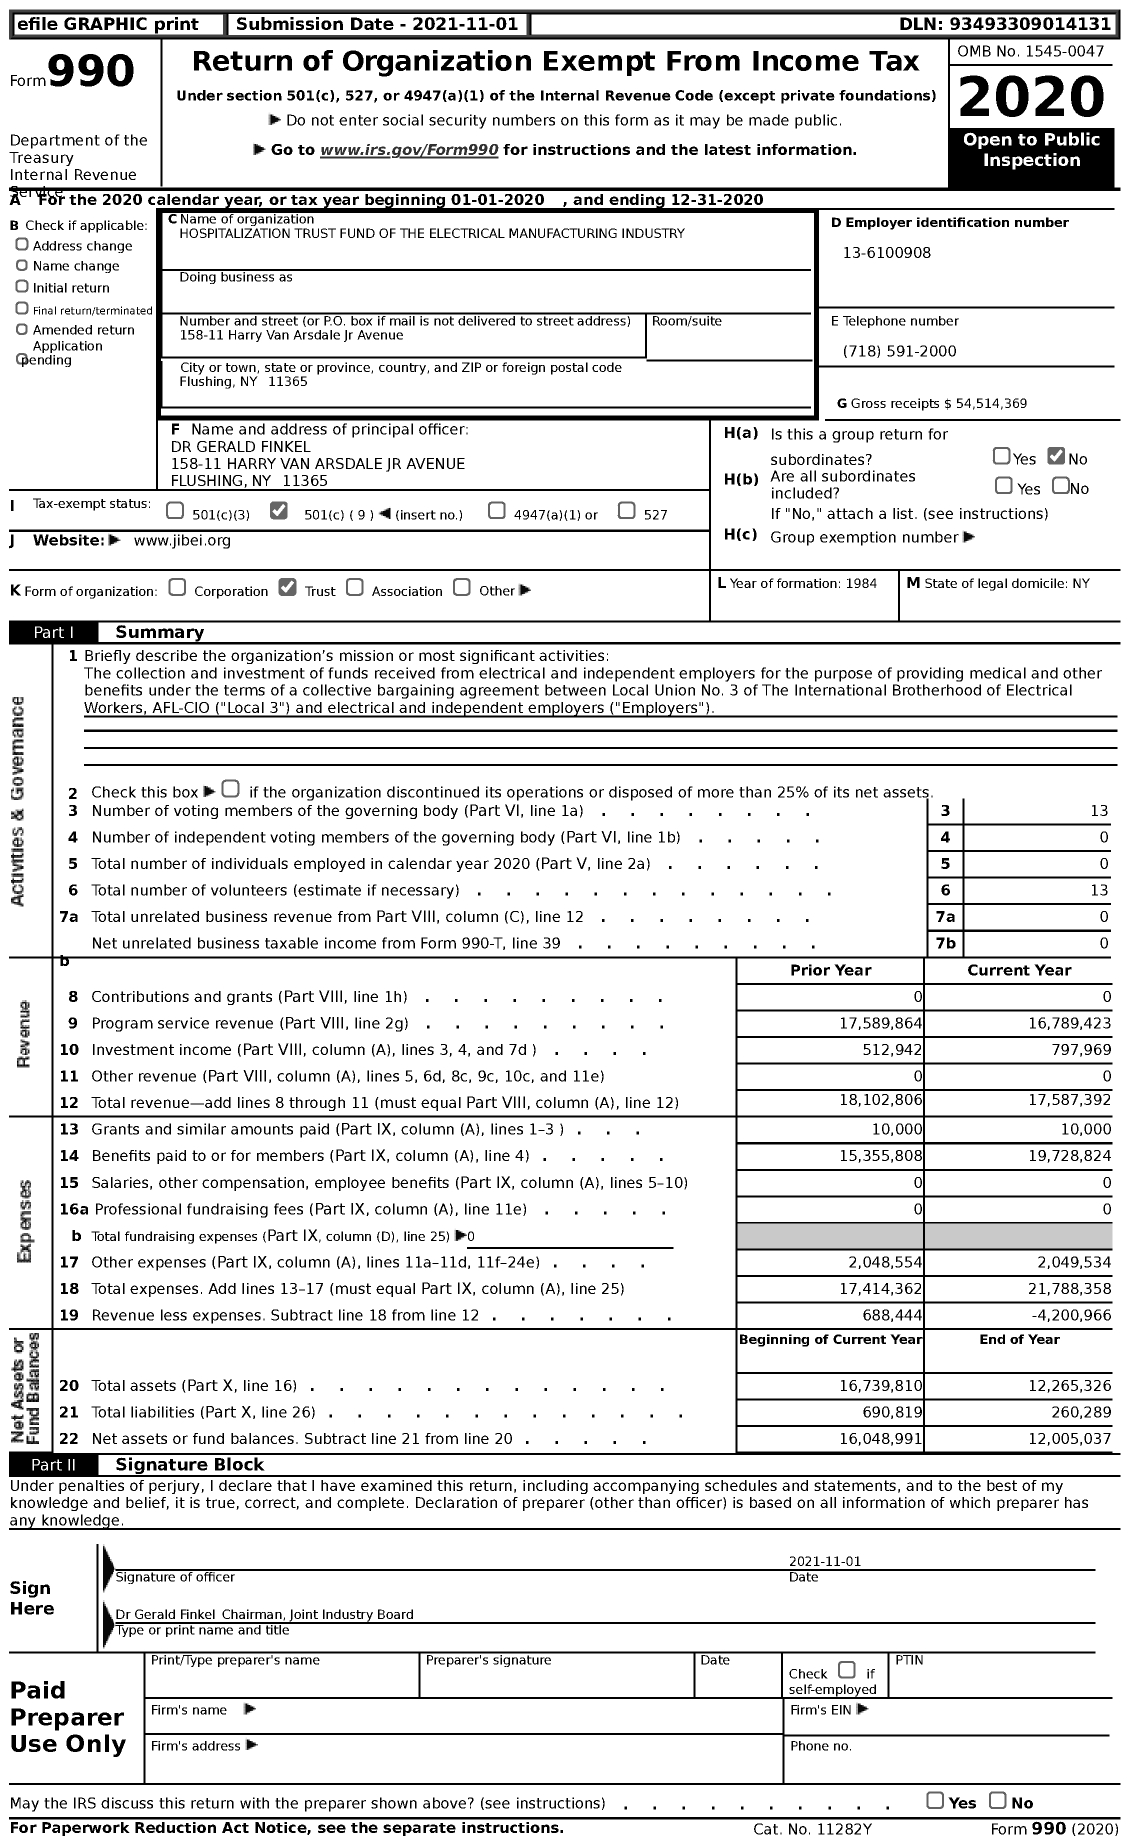 Image of first page of 2020 Form 990 for Hospitalization Trust Fund of the Electrical Manufacturing Industry